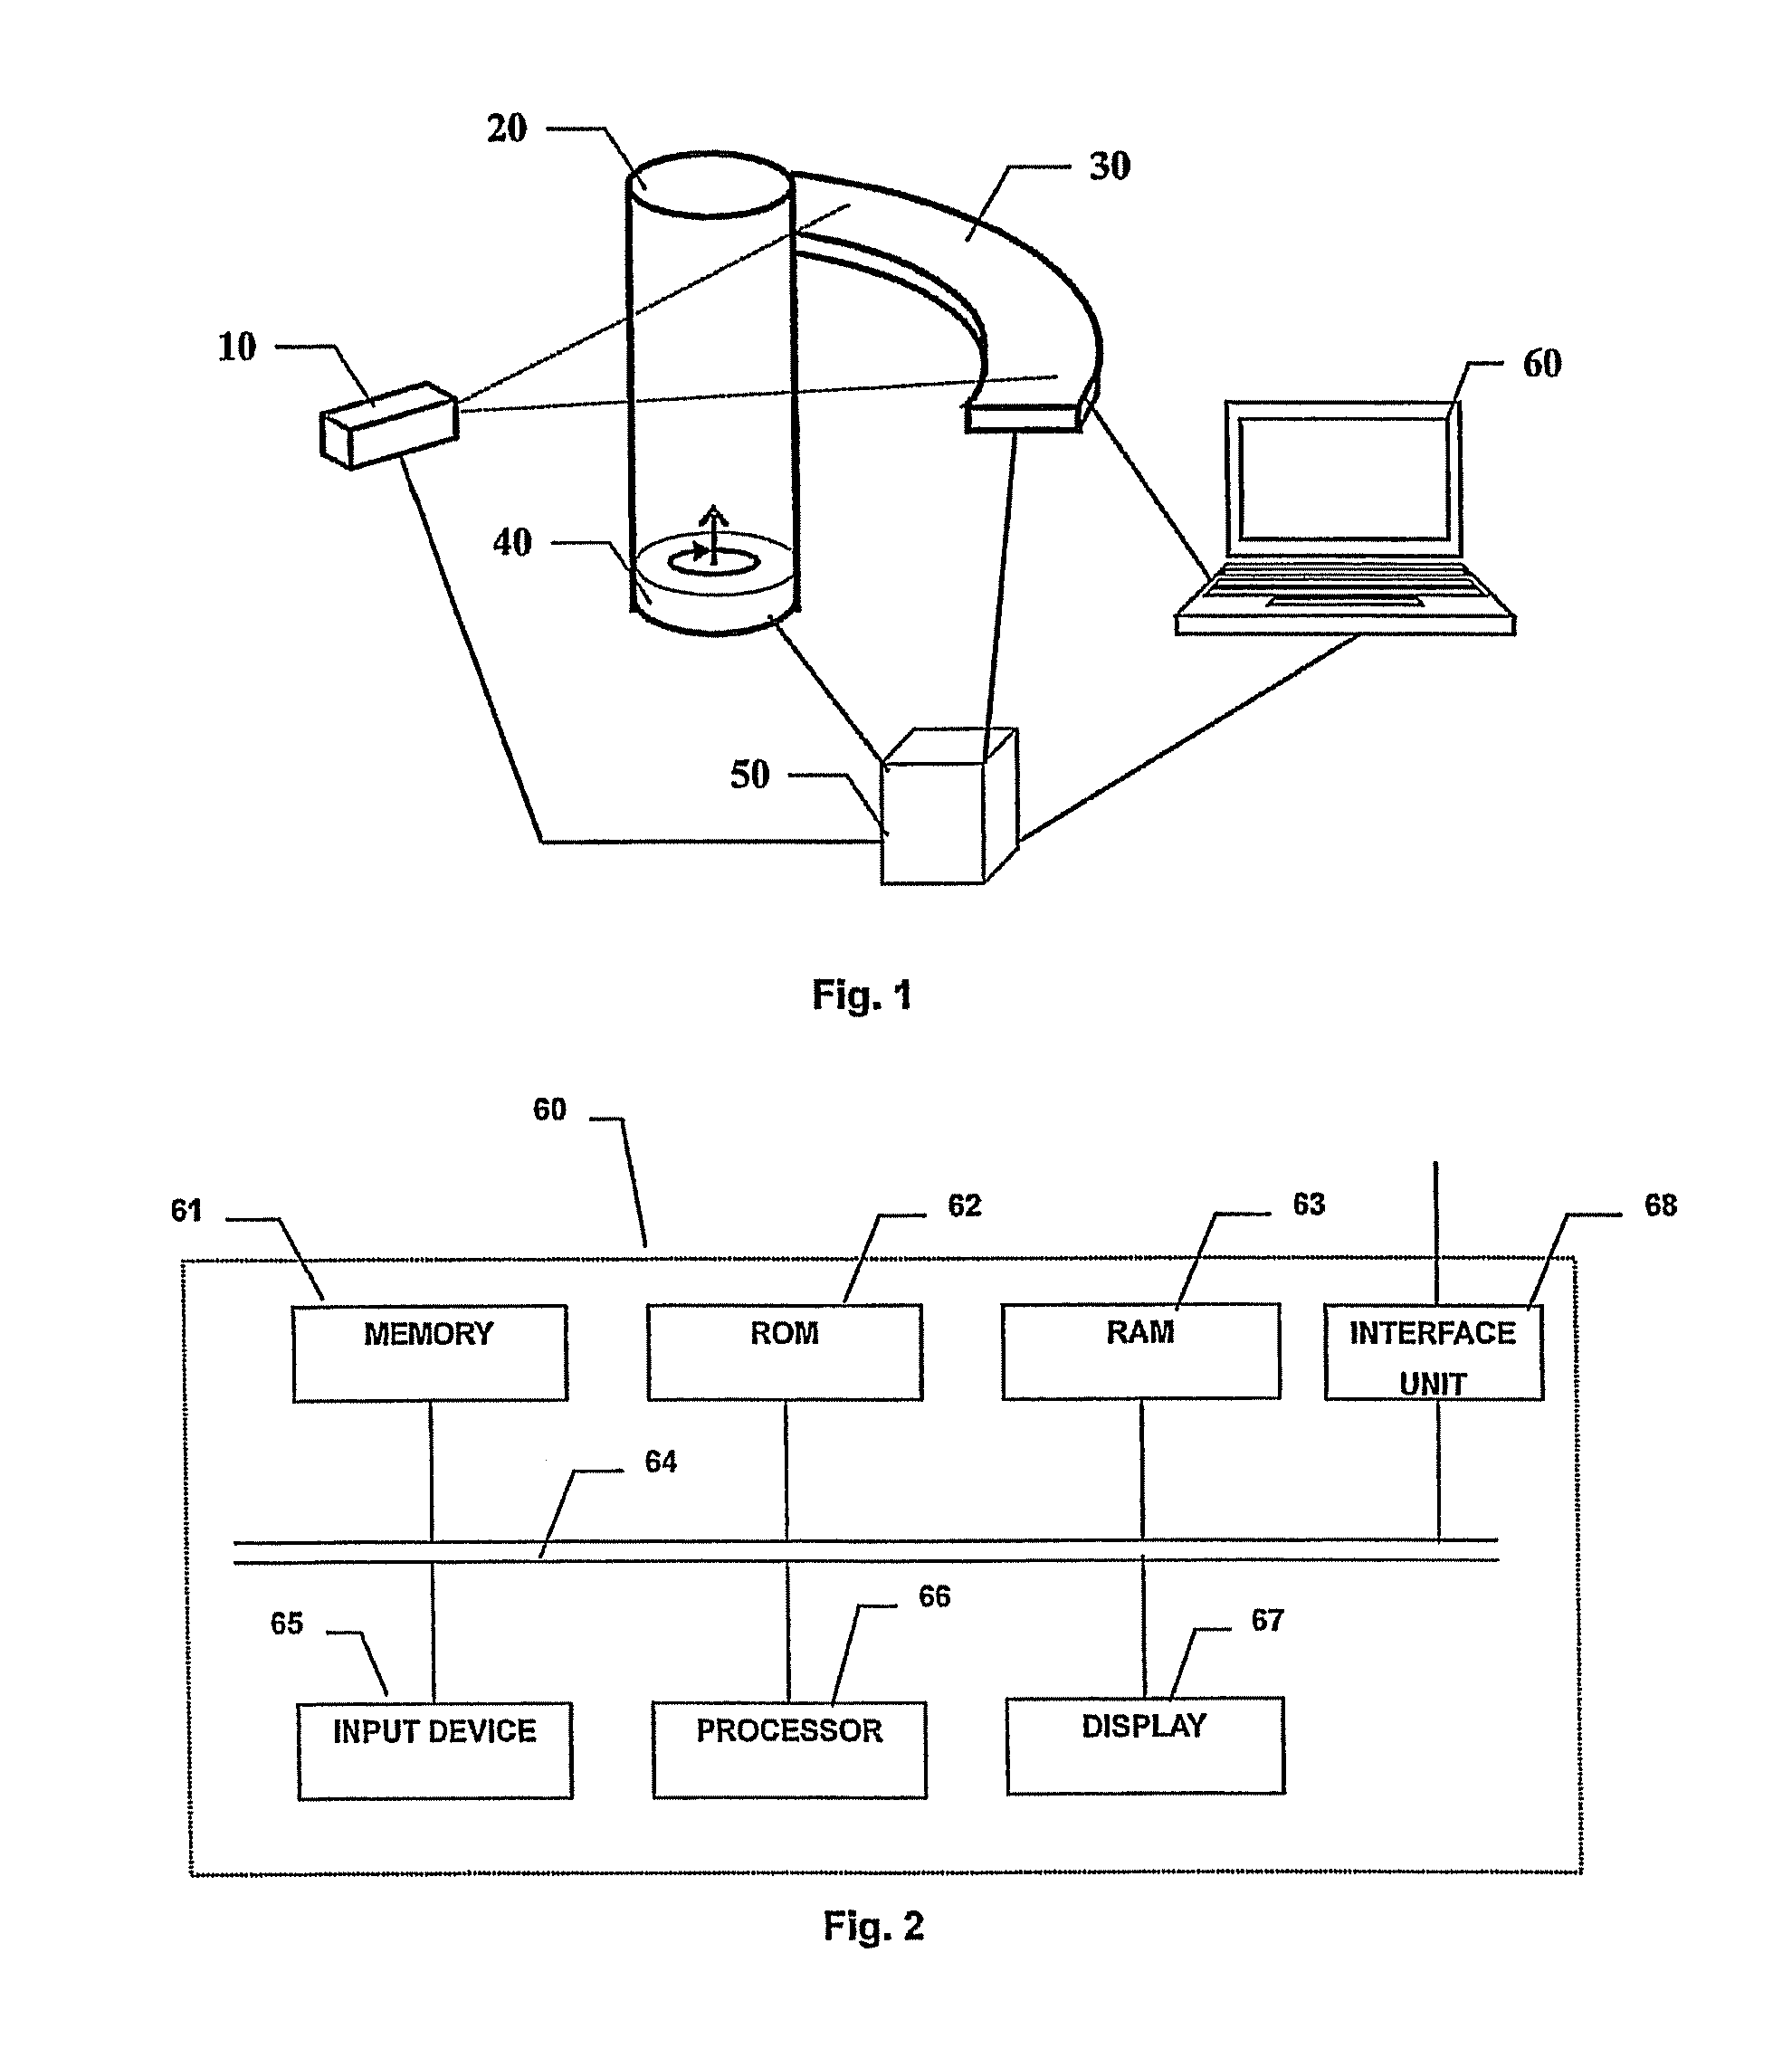 Method and device for inspection of liquid articles